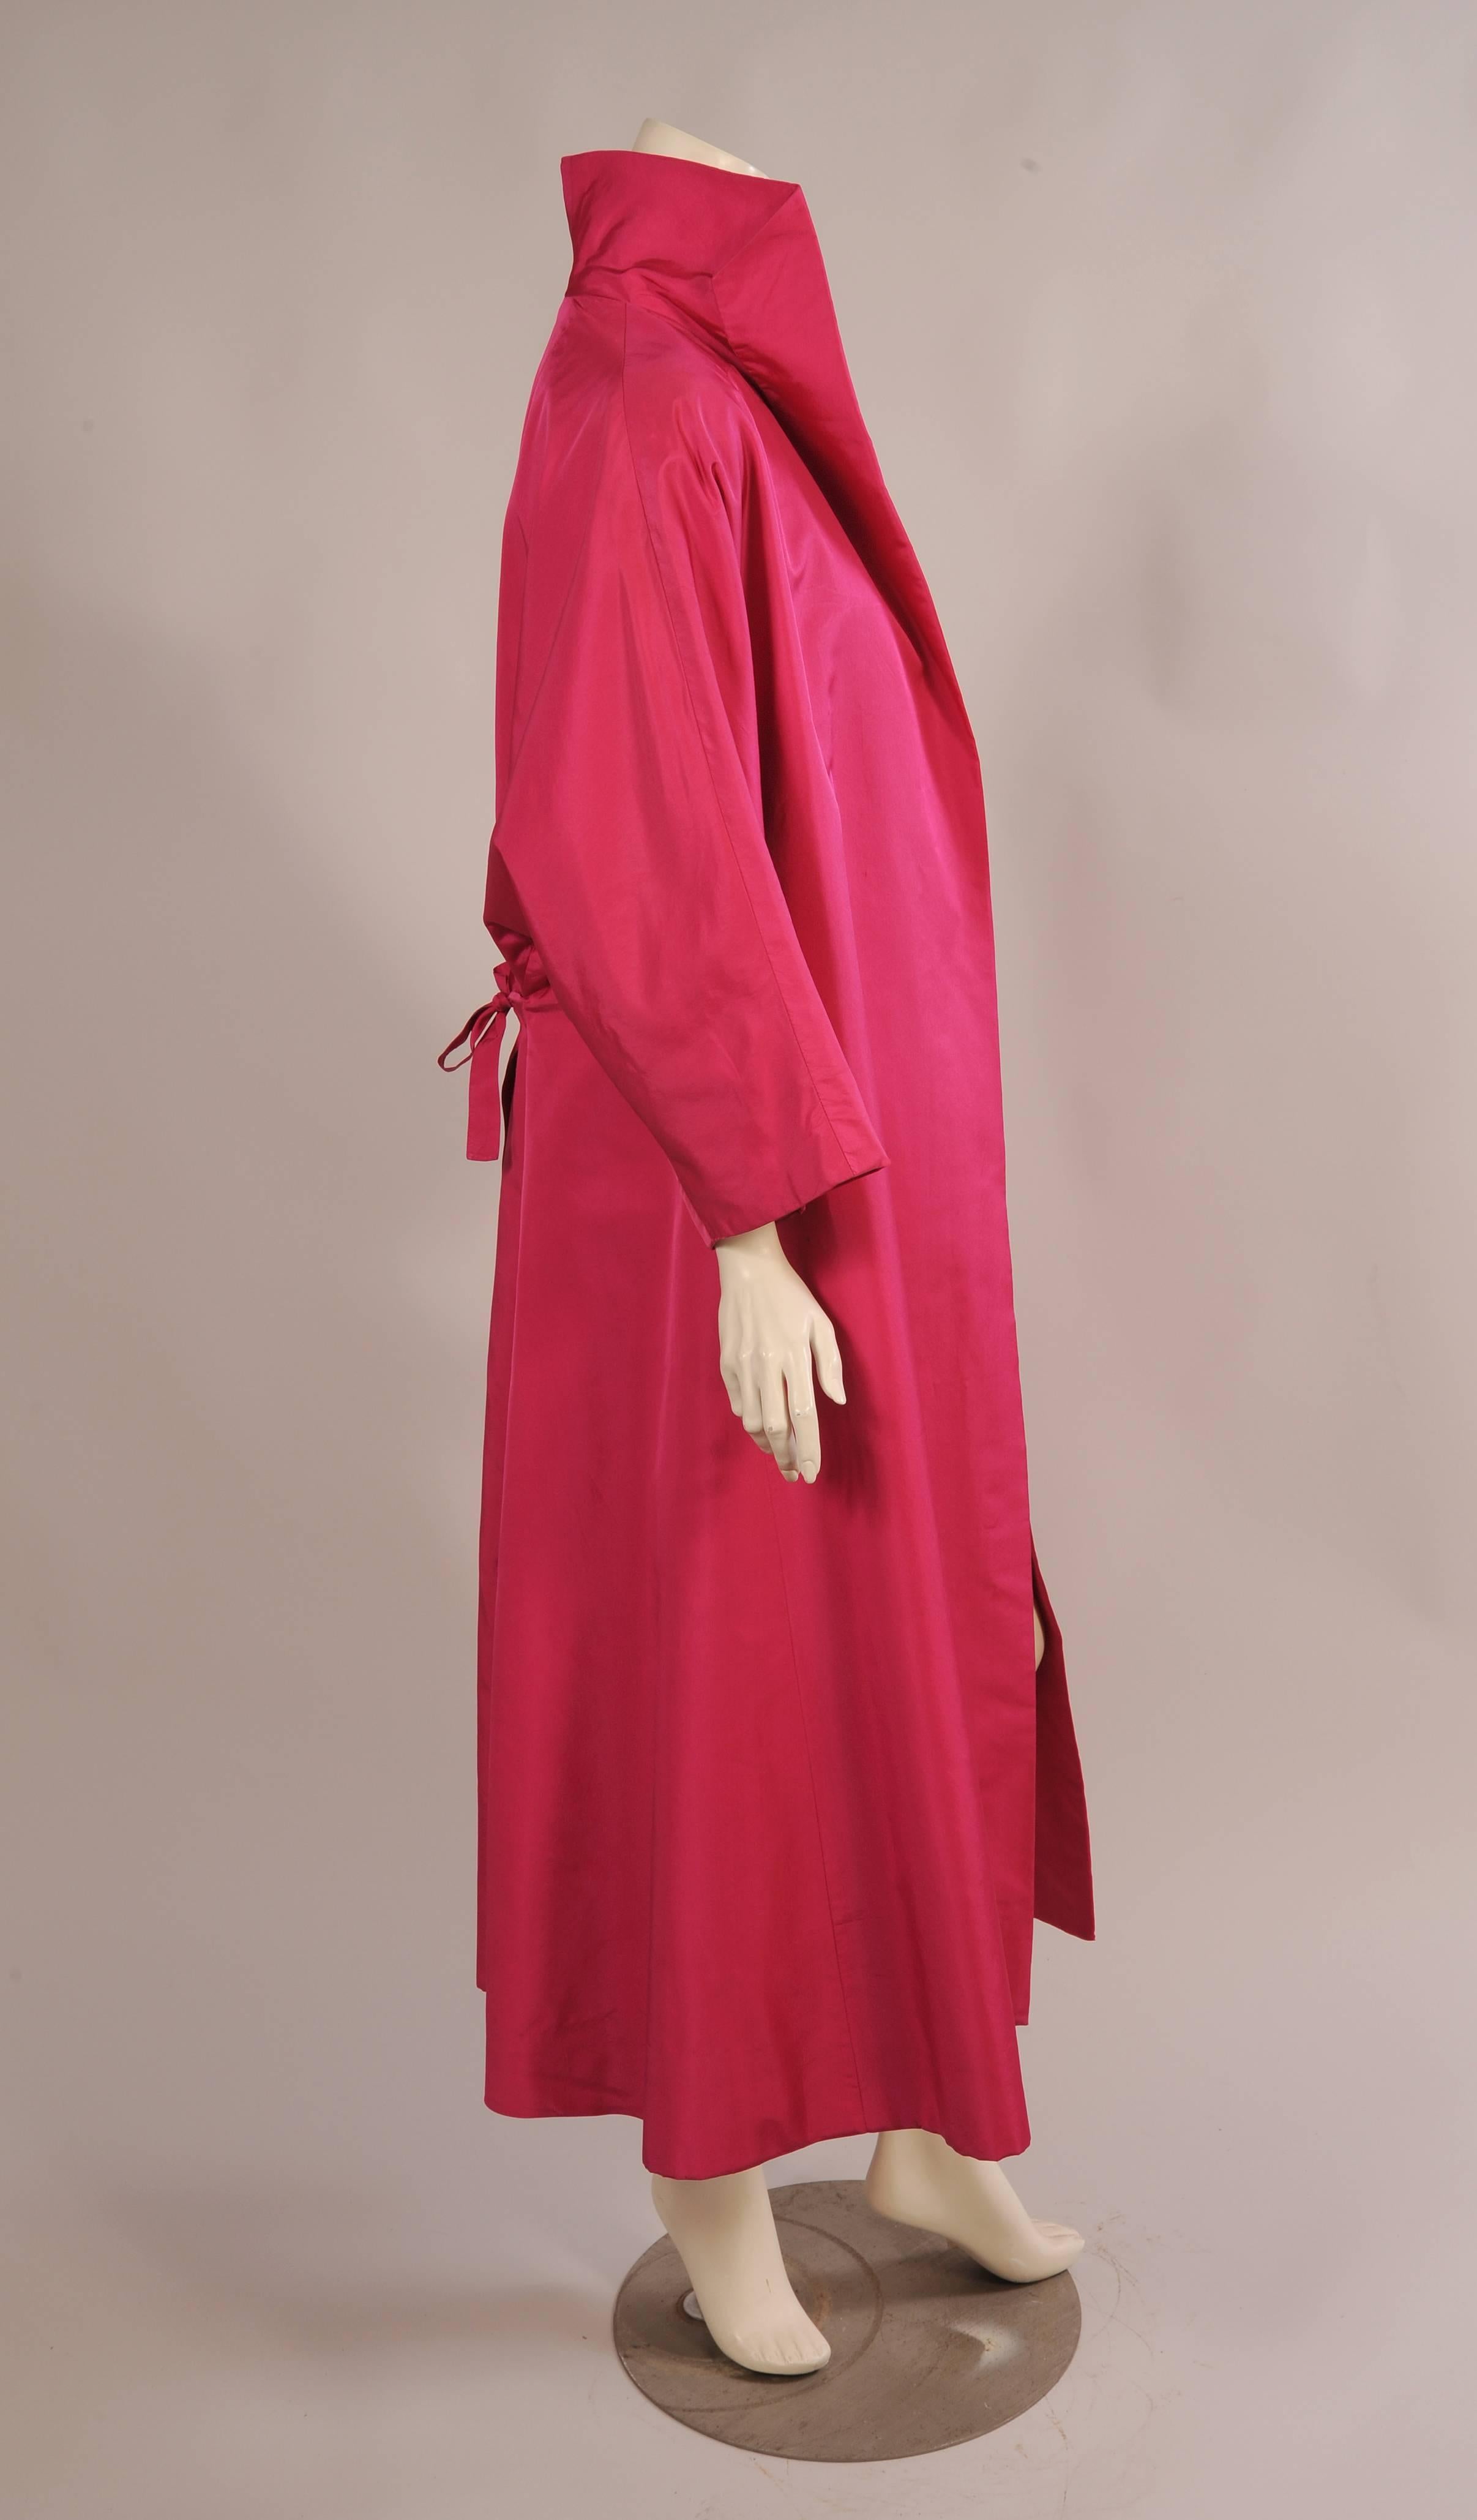 This stunning coat was designed by Hattie Carnegie in the 1950's for I. Magnin. The coat is the most beautiful shade of pink silk which would work well with so many other colors or prints. It has a shawl collar and a full swing cut with gathers at